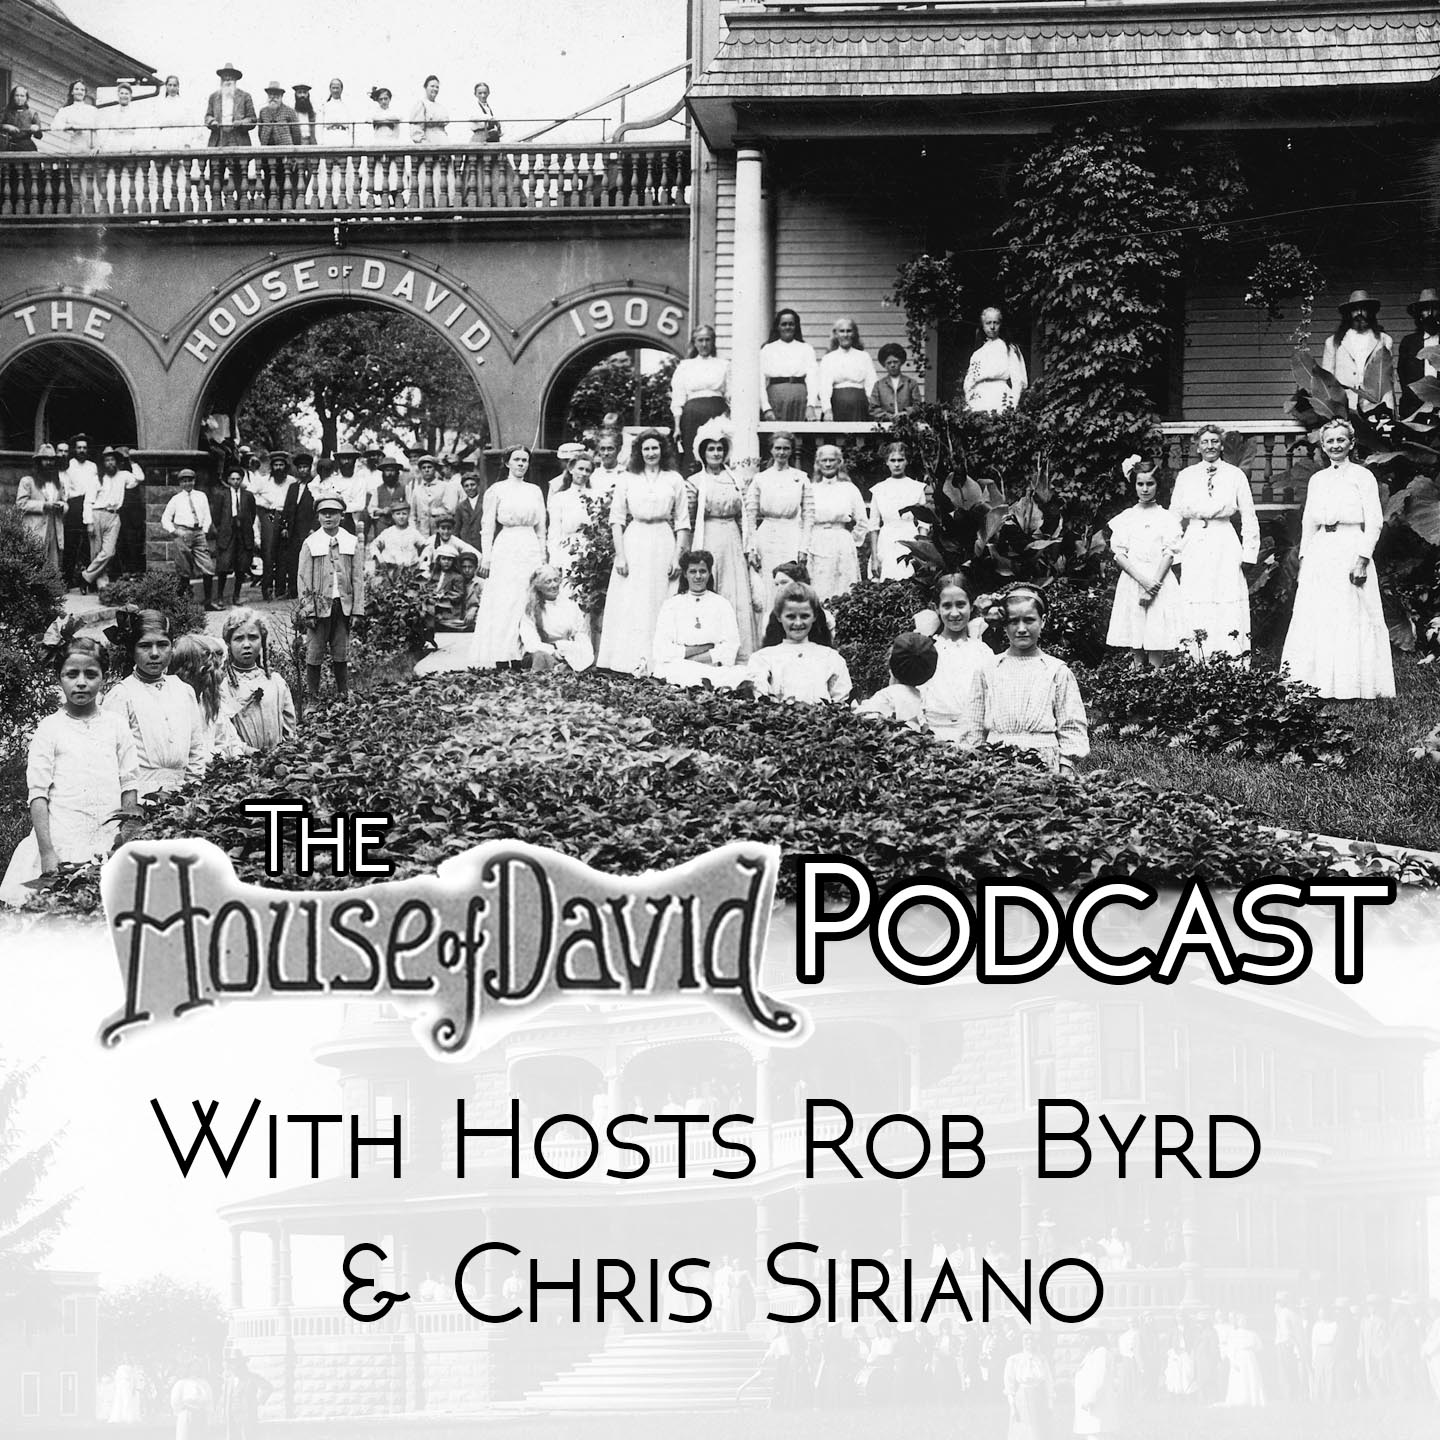 The House of David Podcast